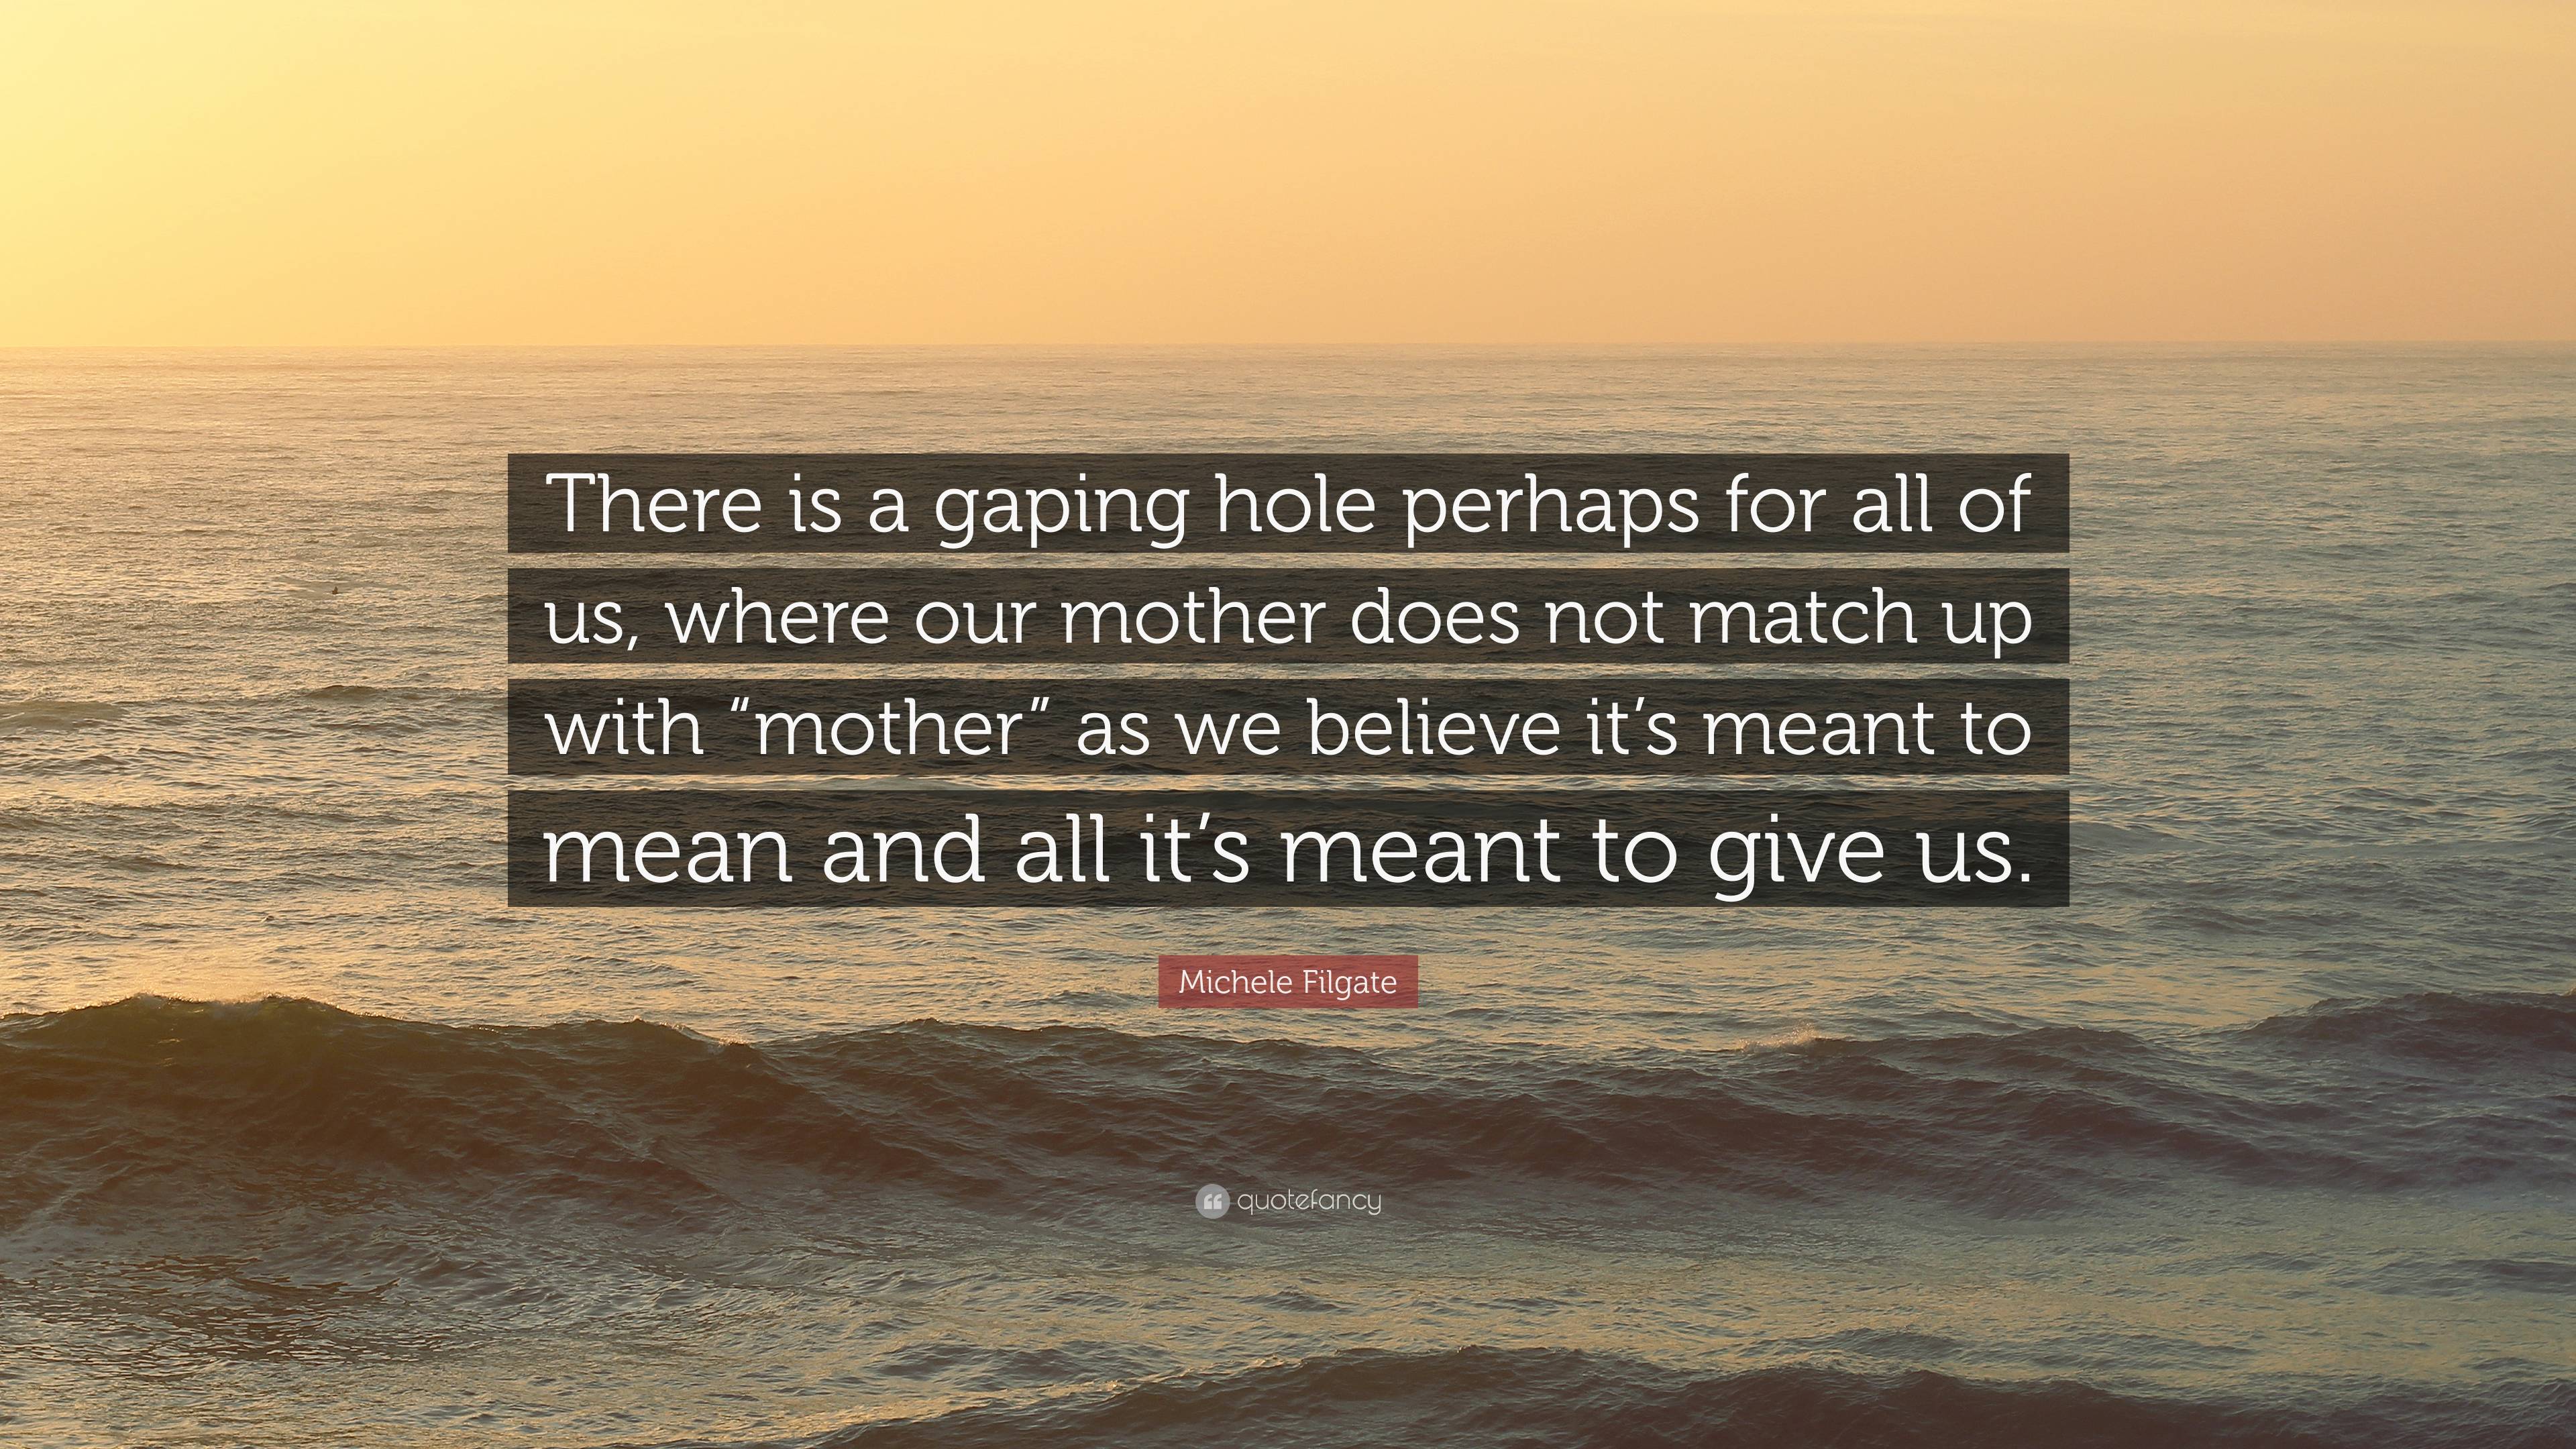 Michele Filgate Quote: “There is a gaping hole perhaps for all of